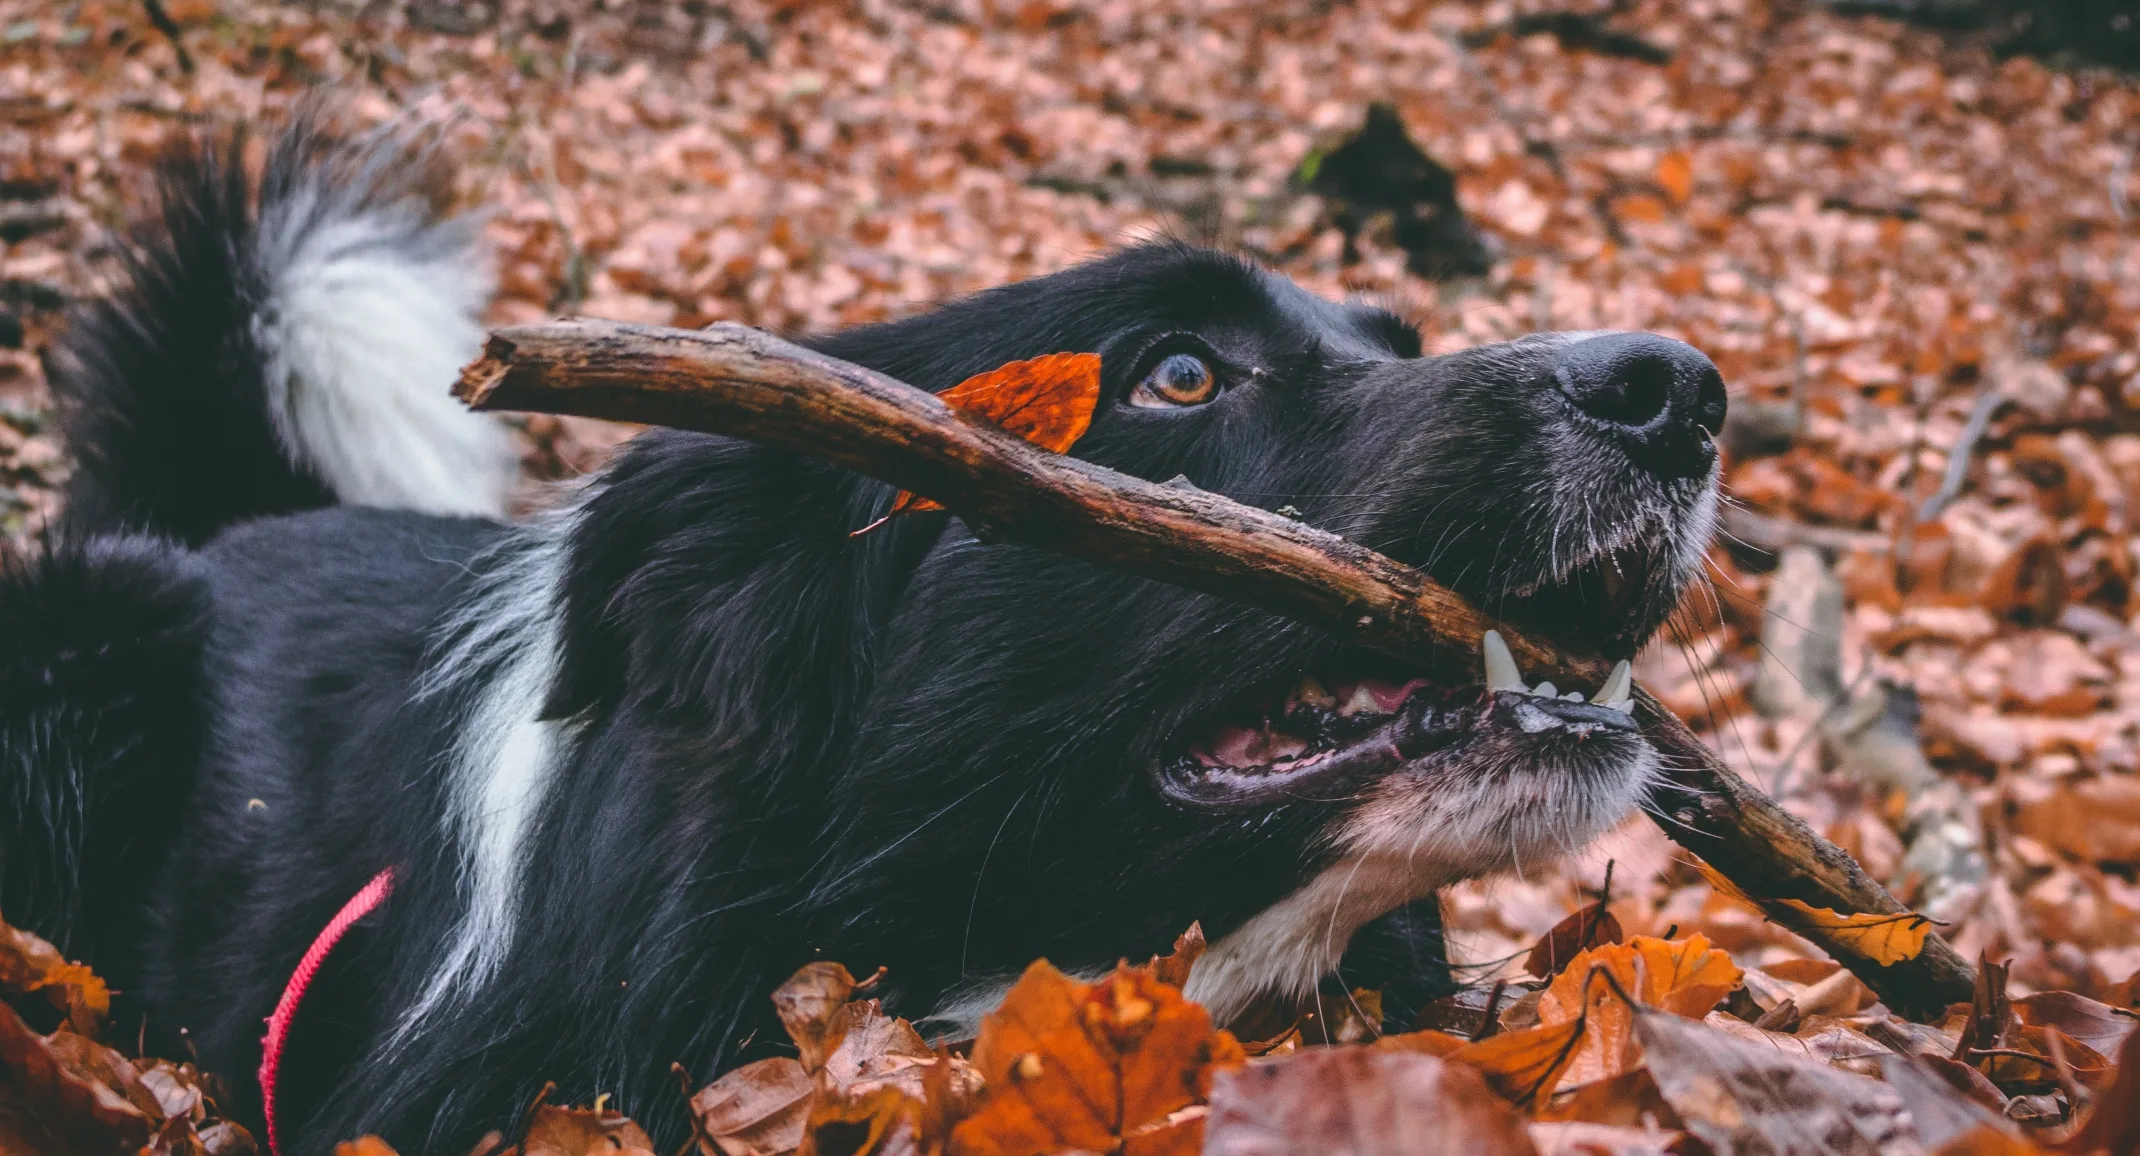 A black dog playing in the fall leaves with a stick in its mouth